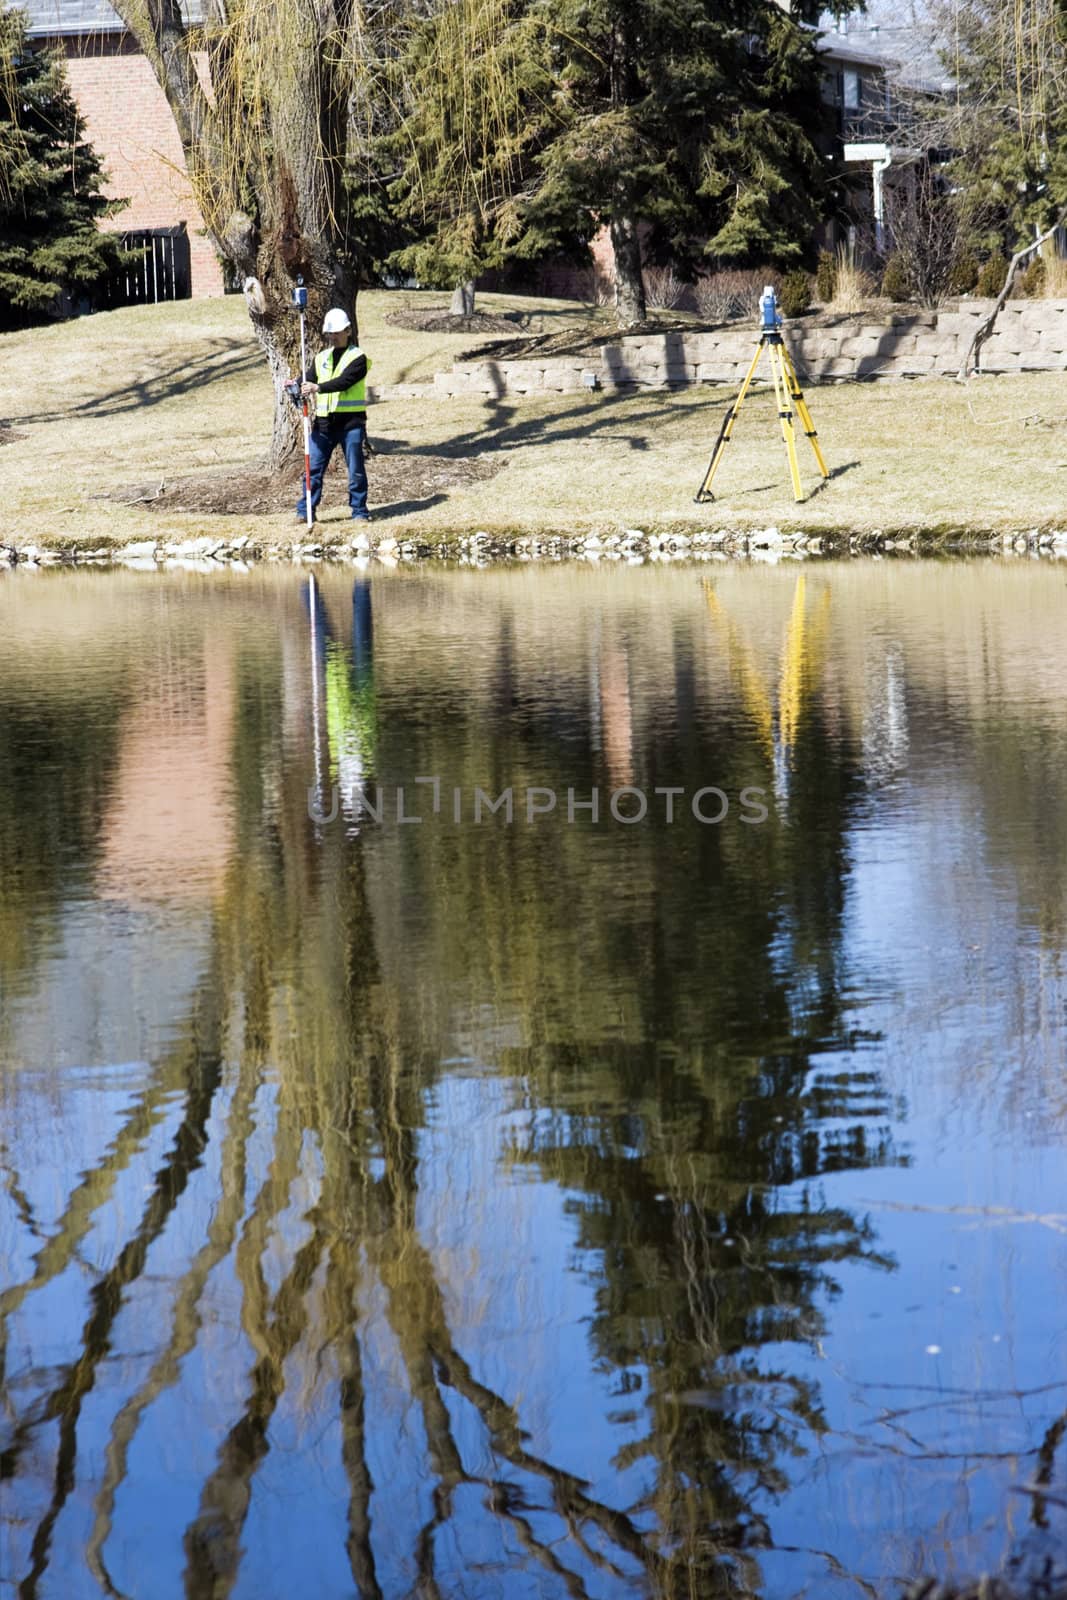 Taking measurements by the lake - spring time.